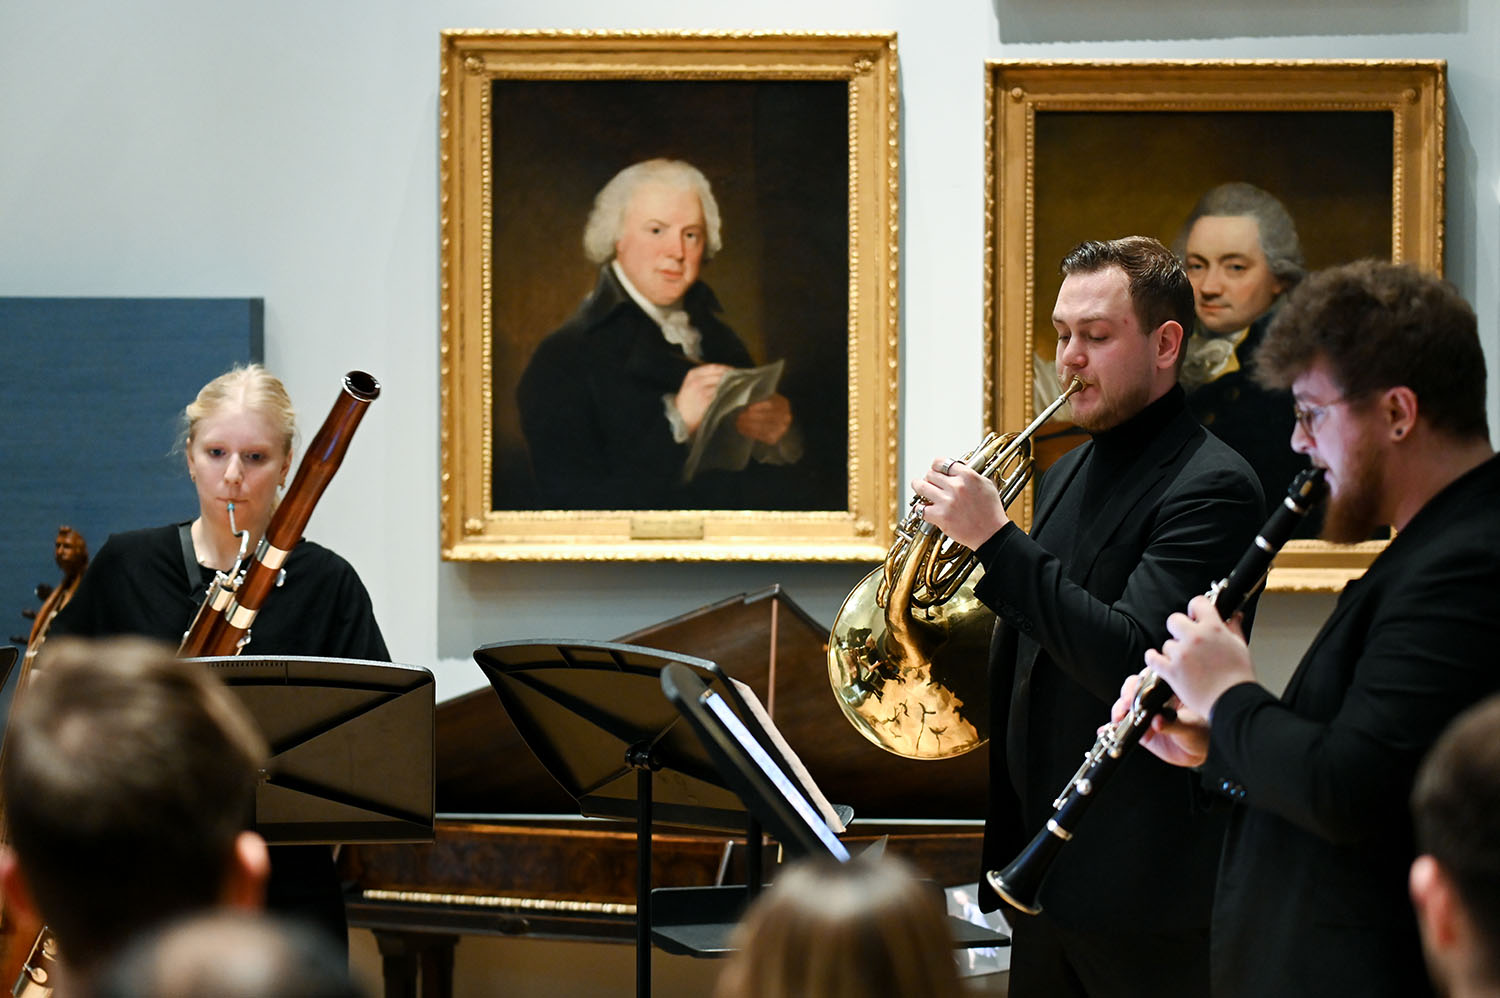 Three musicians perform in the RCM Museum